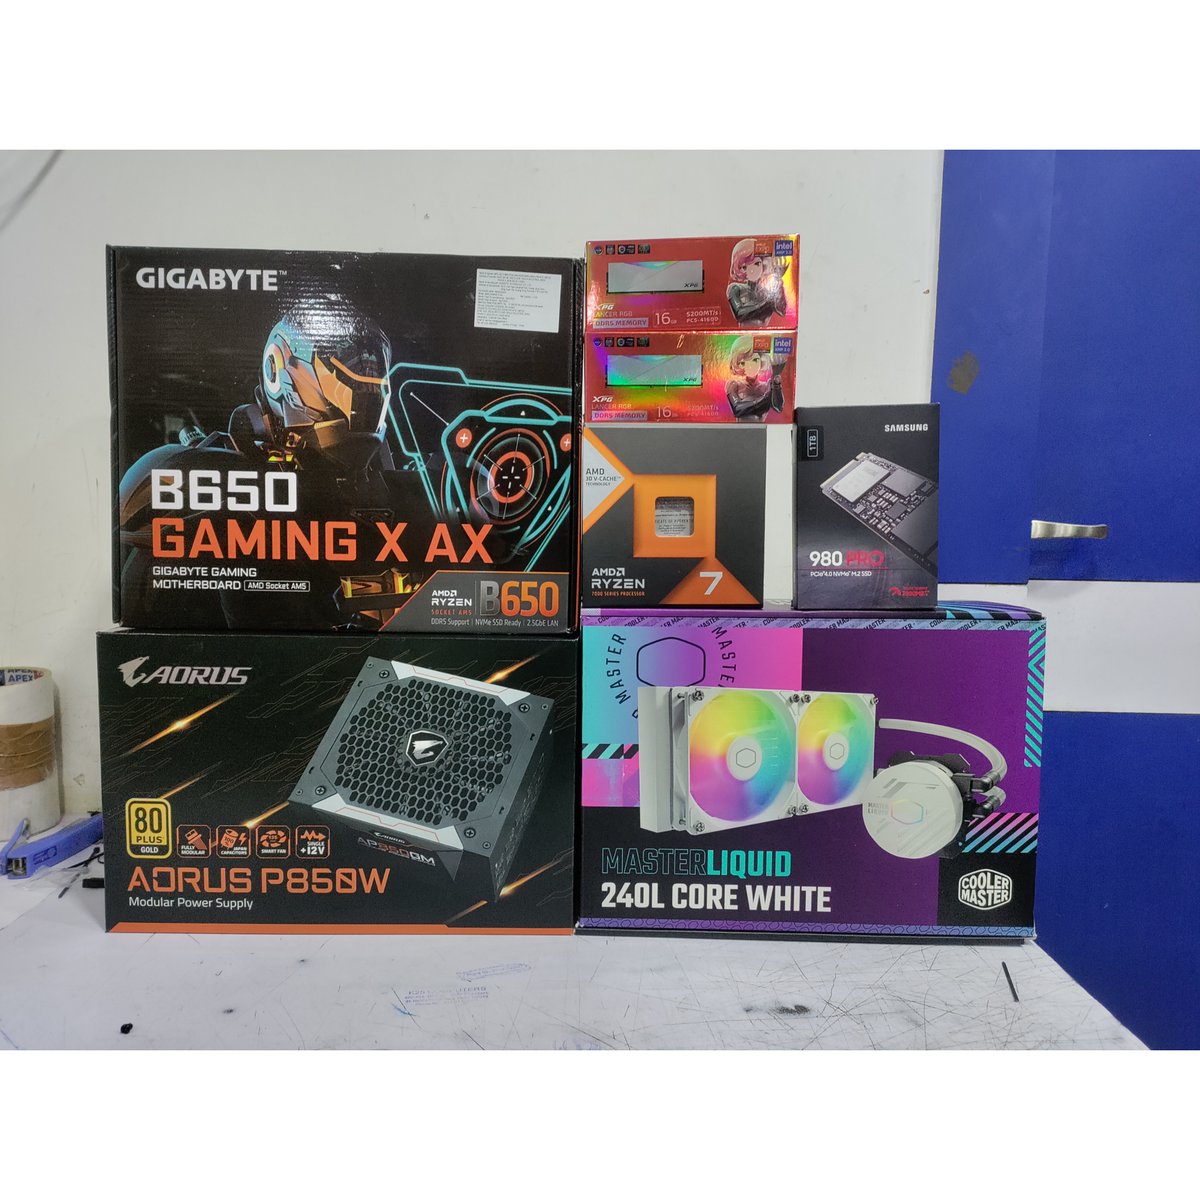 ✨PC FOR GAMING & GAME DEVLOPMENT💯💯
CONGRATULATIONS BROTHER❣️SOURABH KUMAR

Amd 7 7800x3D with msi RTX 3080ti

🔥If you want to order a Gaming/Editing/Productivity PC Build🔥

#GamingPCBuilt #K25Computers #GamingPC